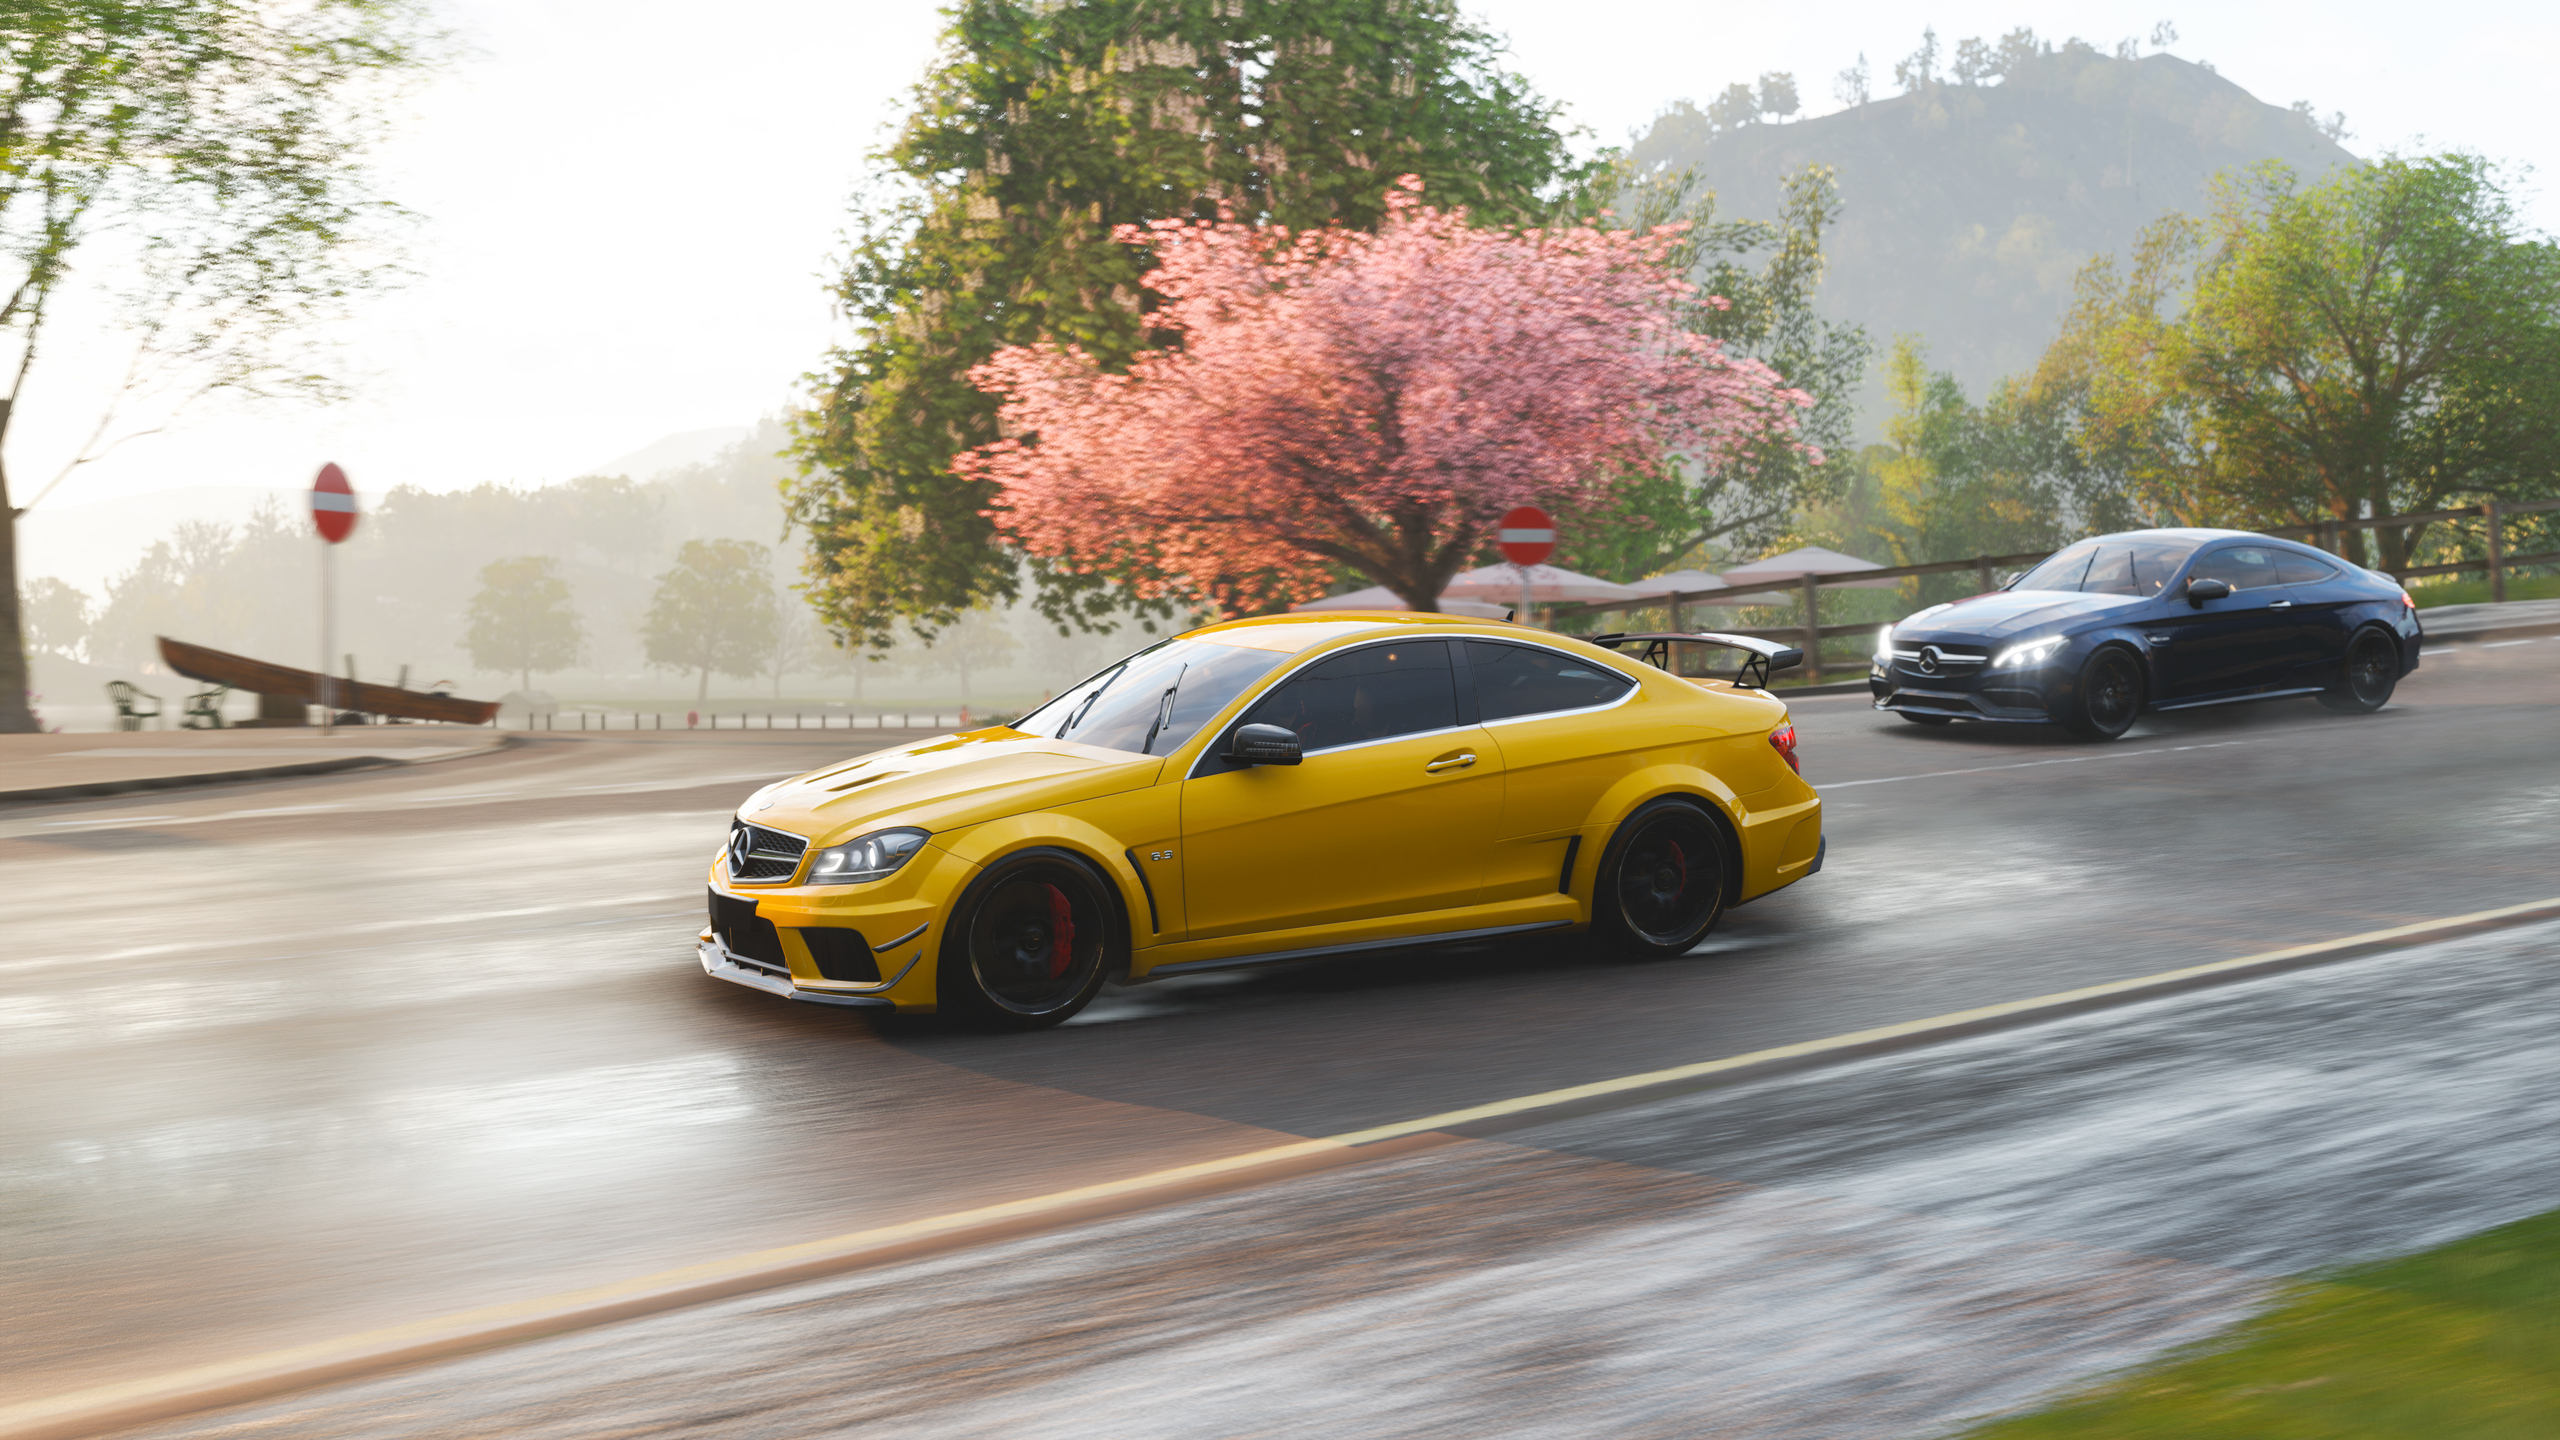 Squire fountain mark 2560x1440 Mercedes Benz C63 AMG Coupe In Forza Horizon 4 4k 1440P  Resolution HD 4k Wallpapers, Images, Backgrounds, Photos and Pictures